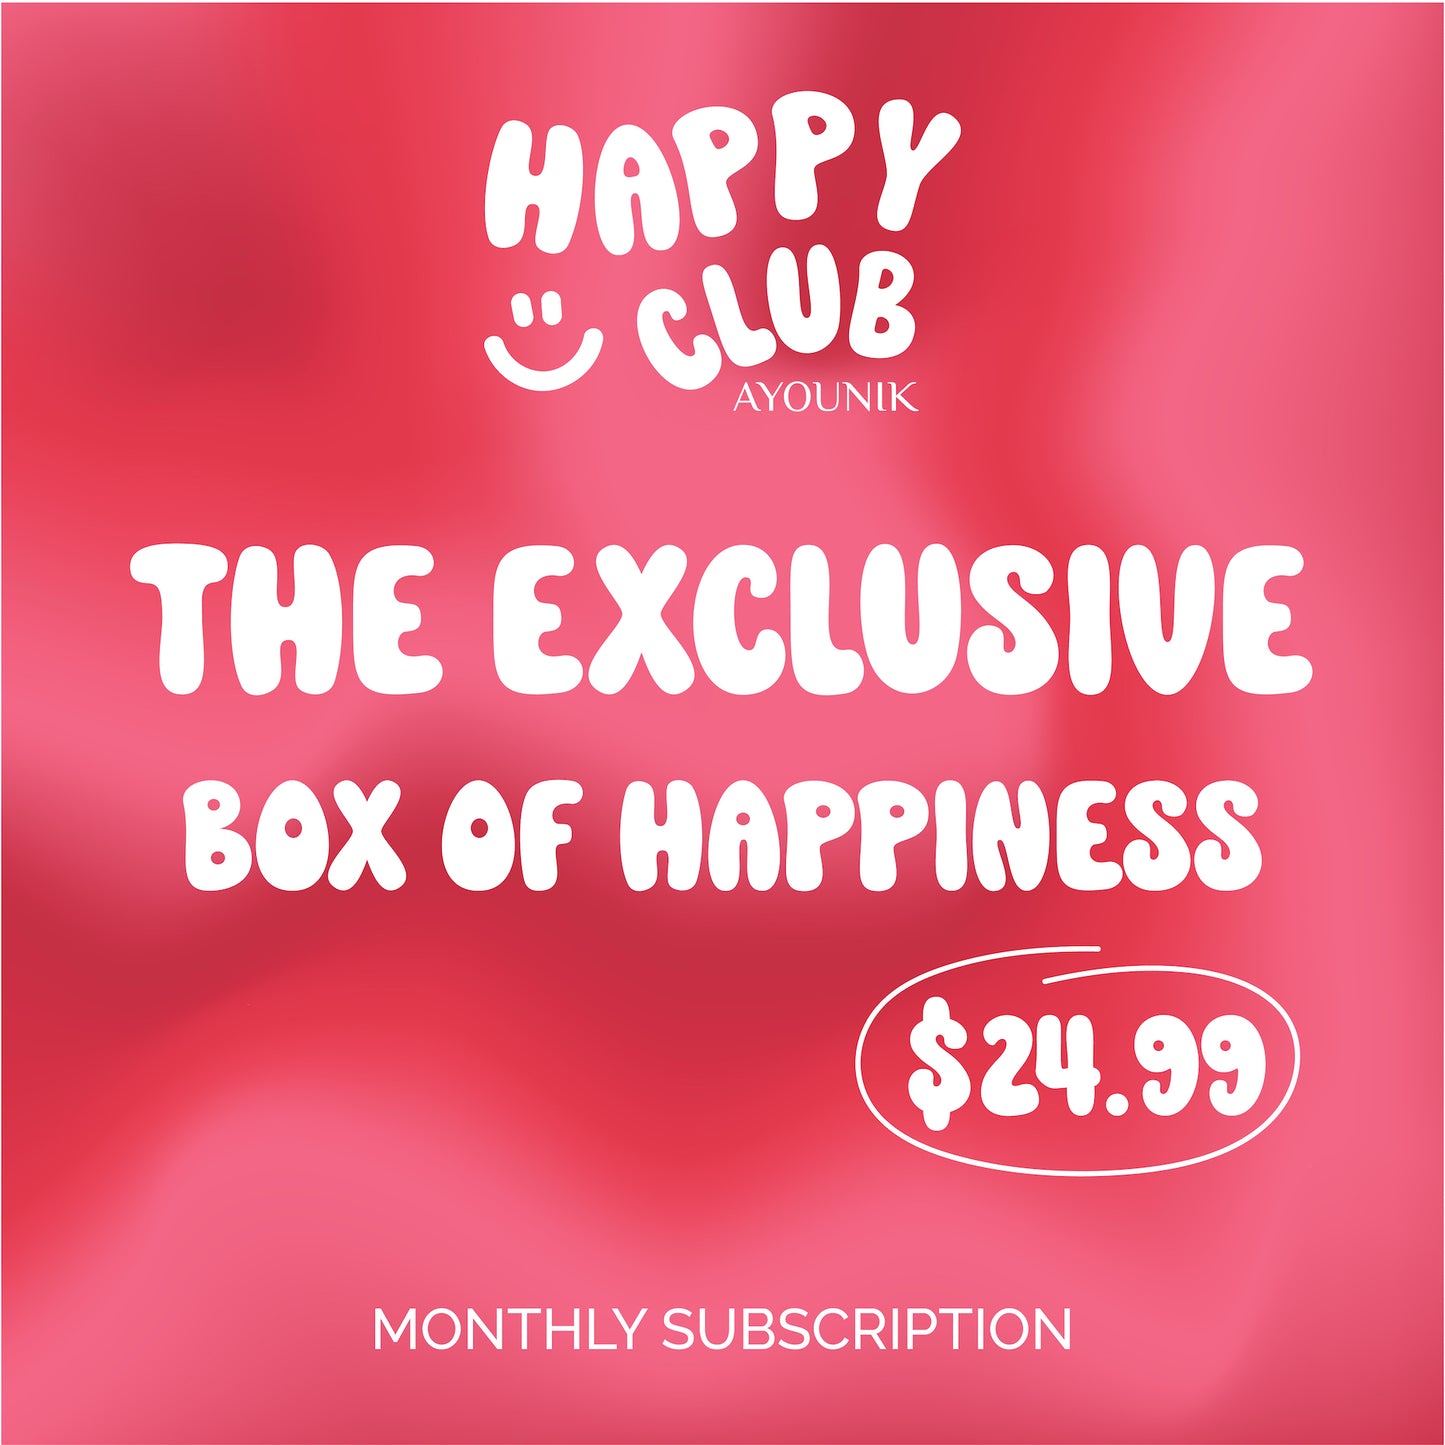 The Exclusive Box of Happiness - Ayounik Happy Club